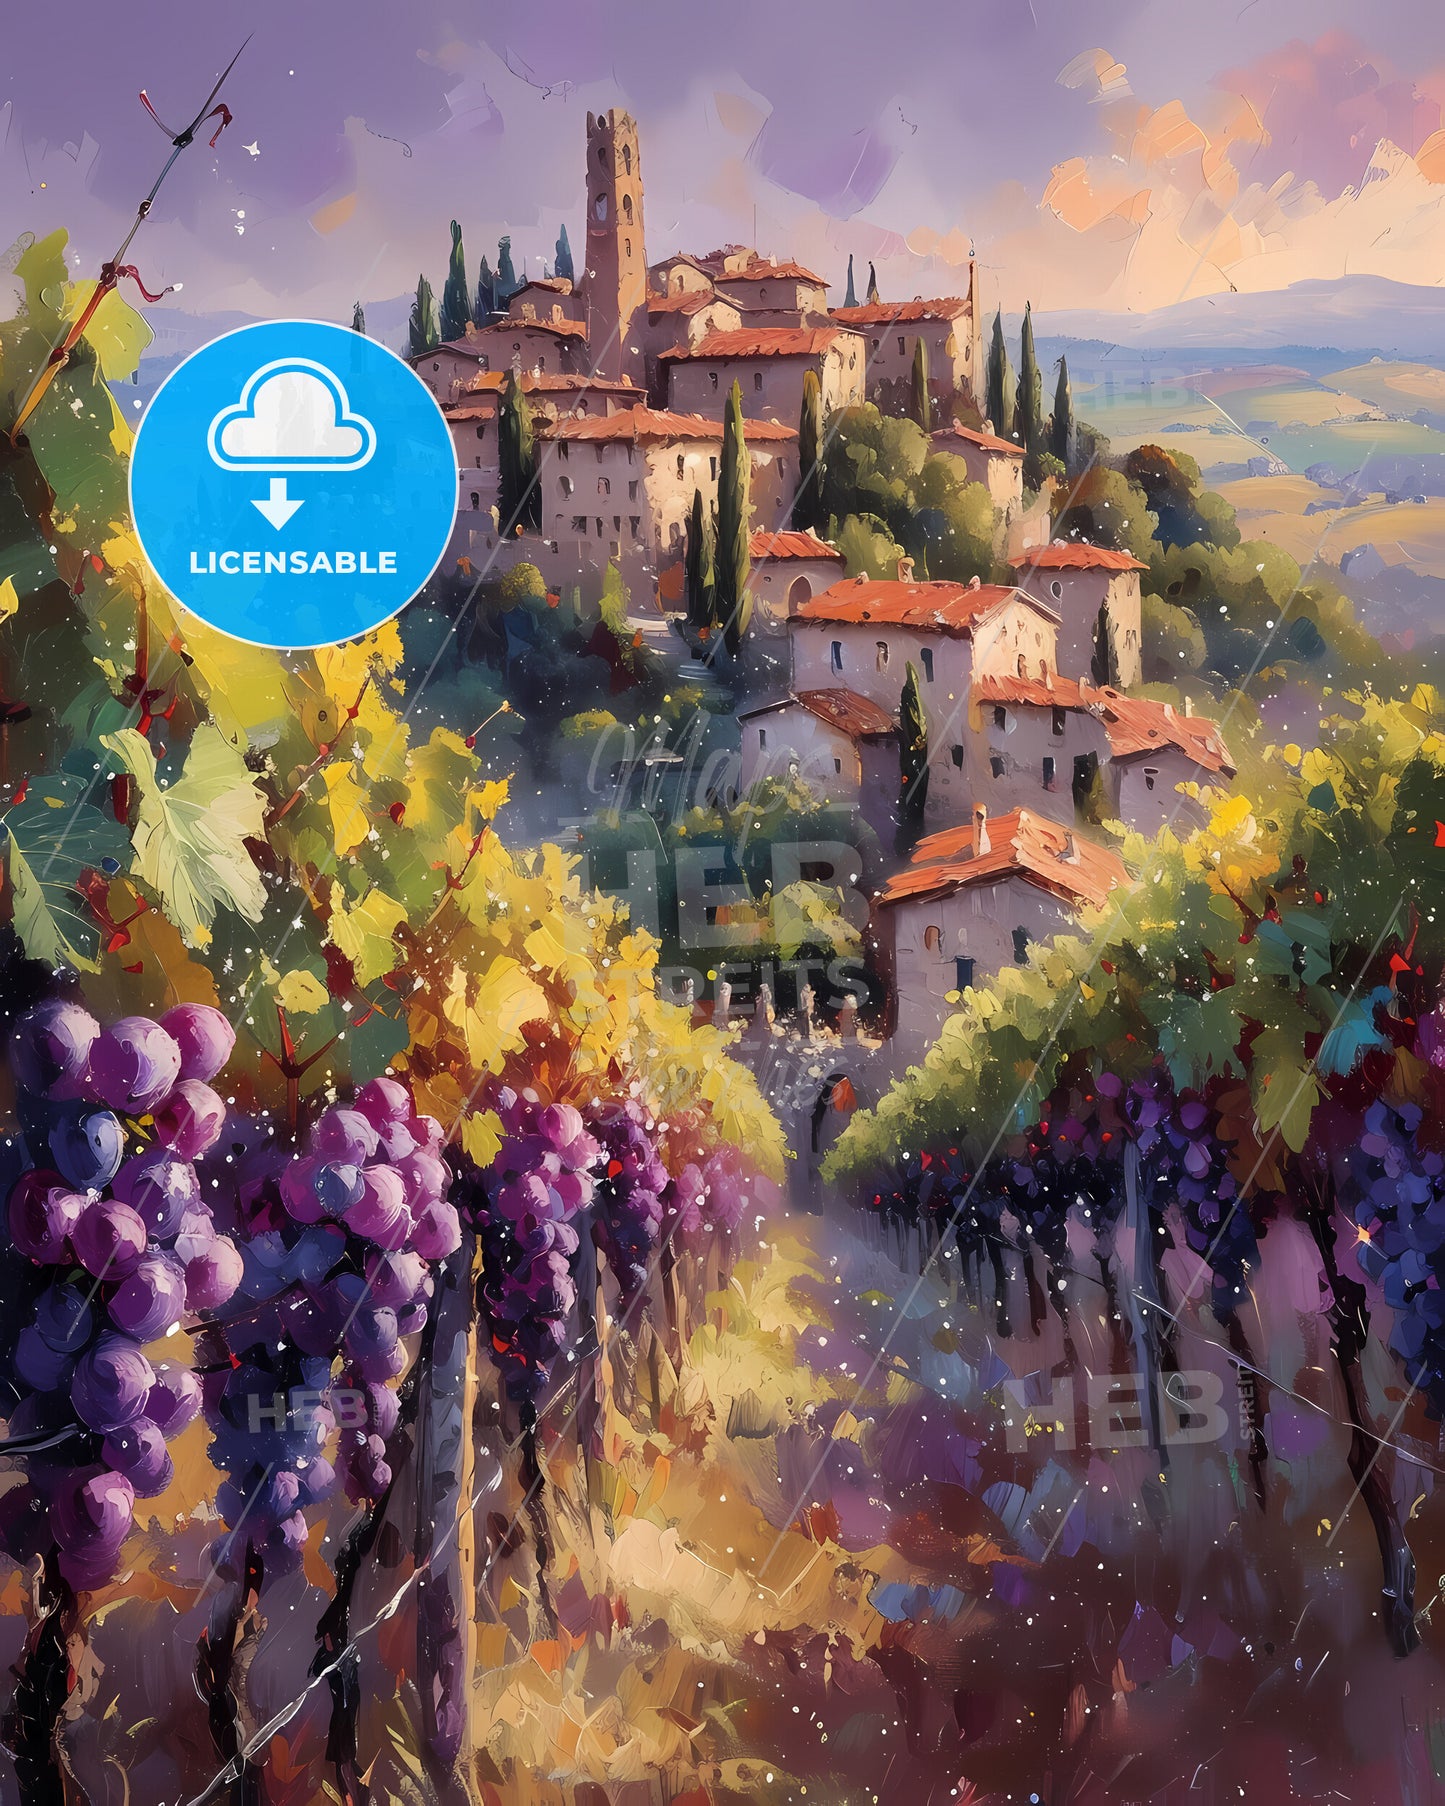 Tuscany, Italy - A Painting Of A Town On A Hill With Grapes